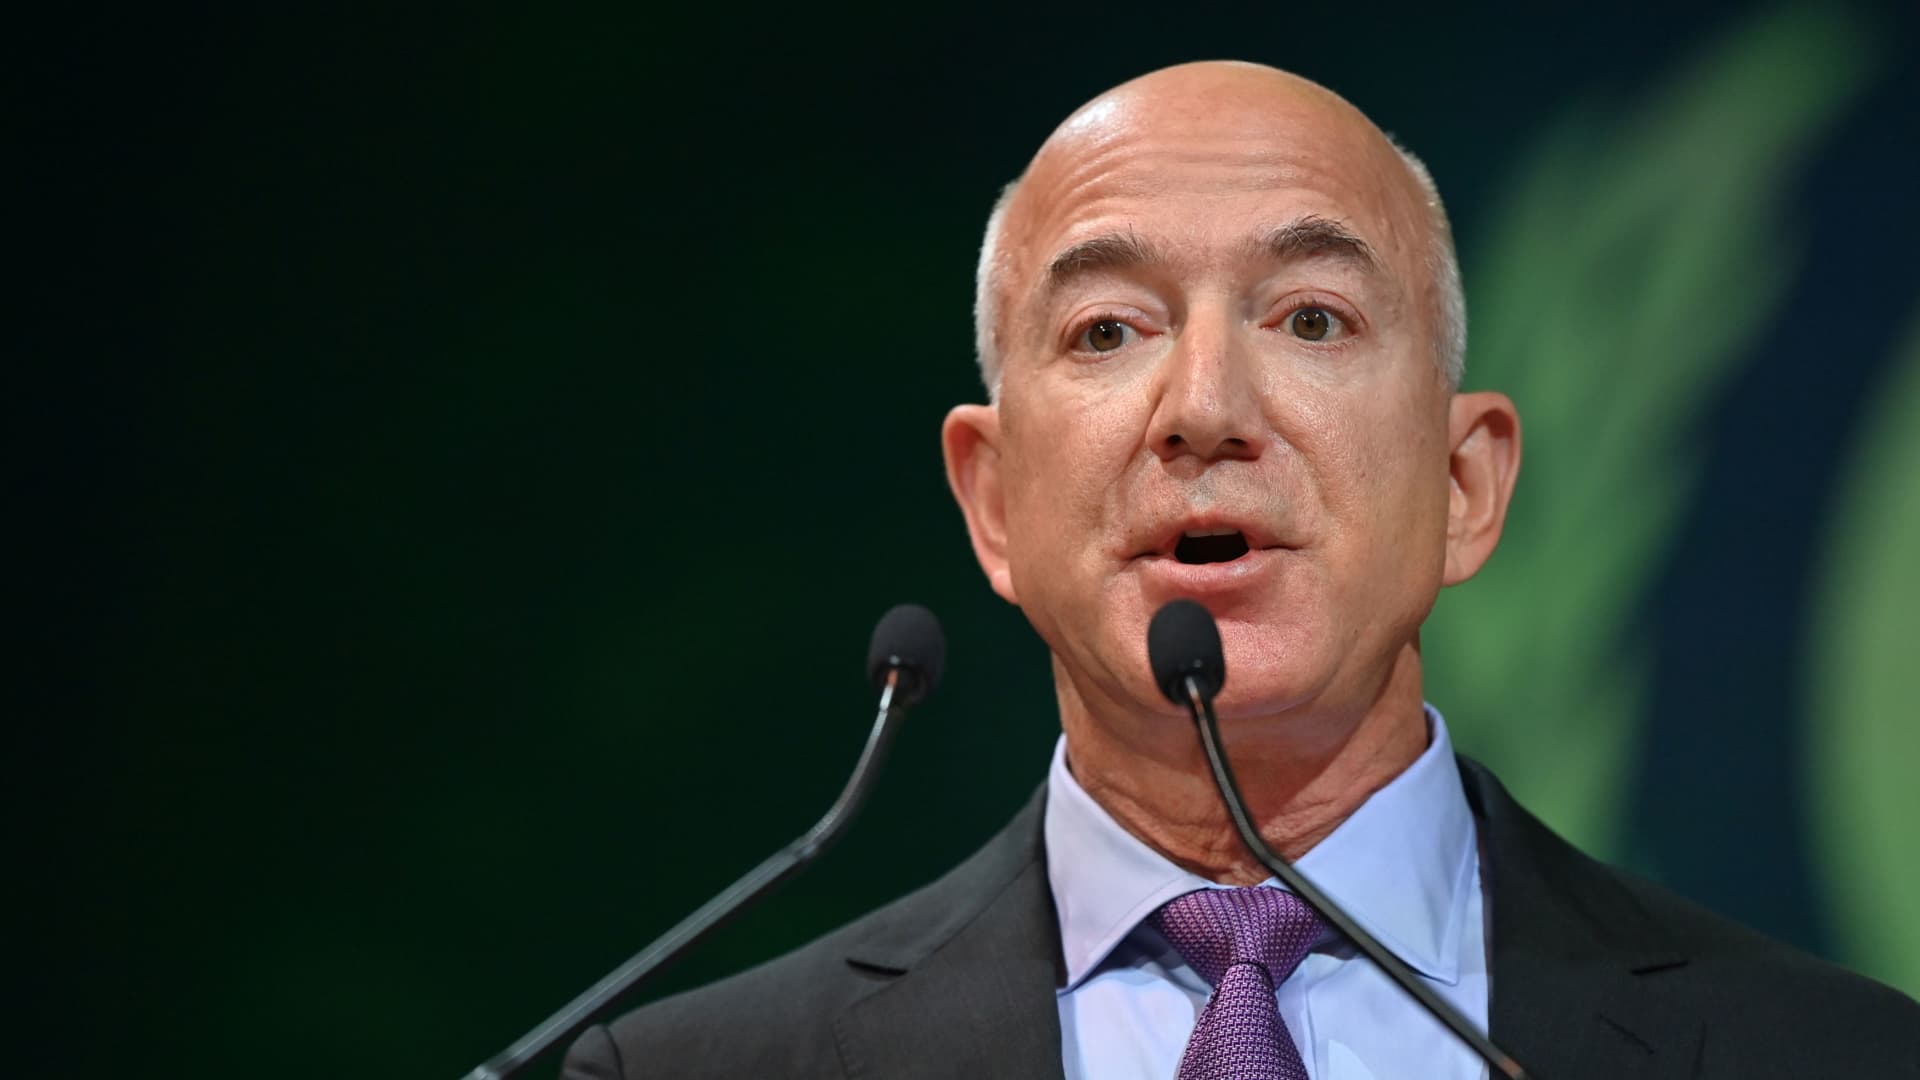 Amazon founder Jeff Bezos warns it's time to 'batten down the hatches'